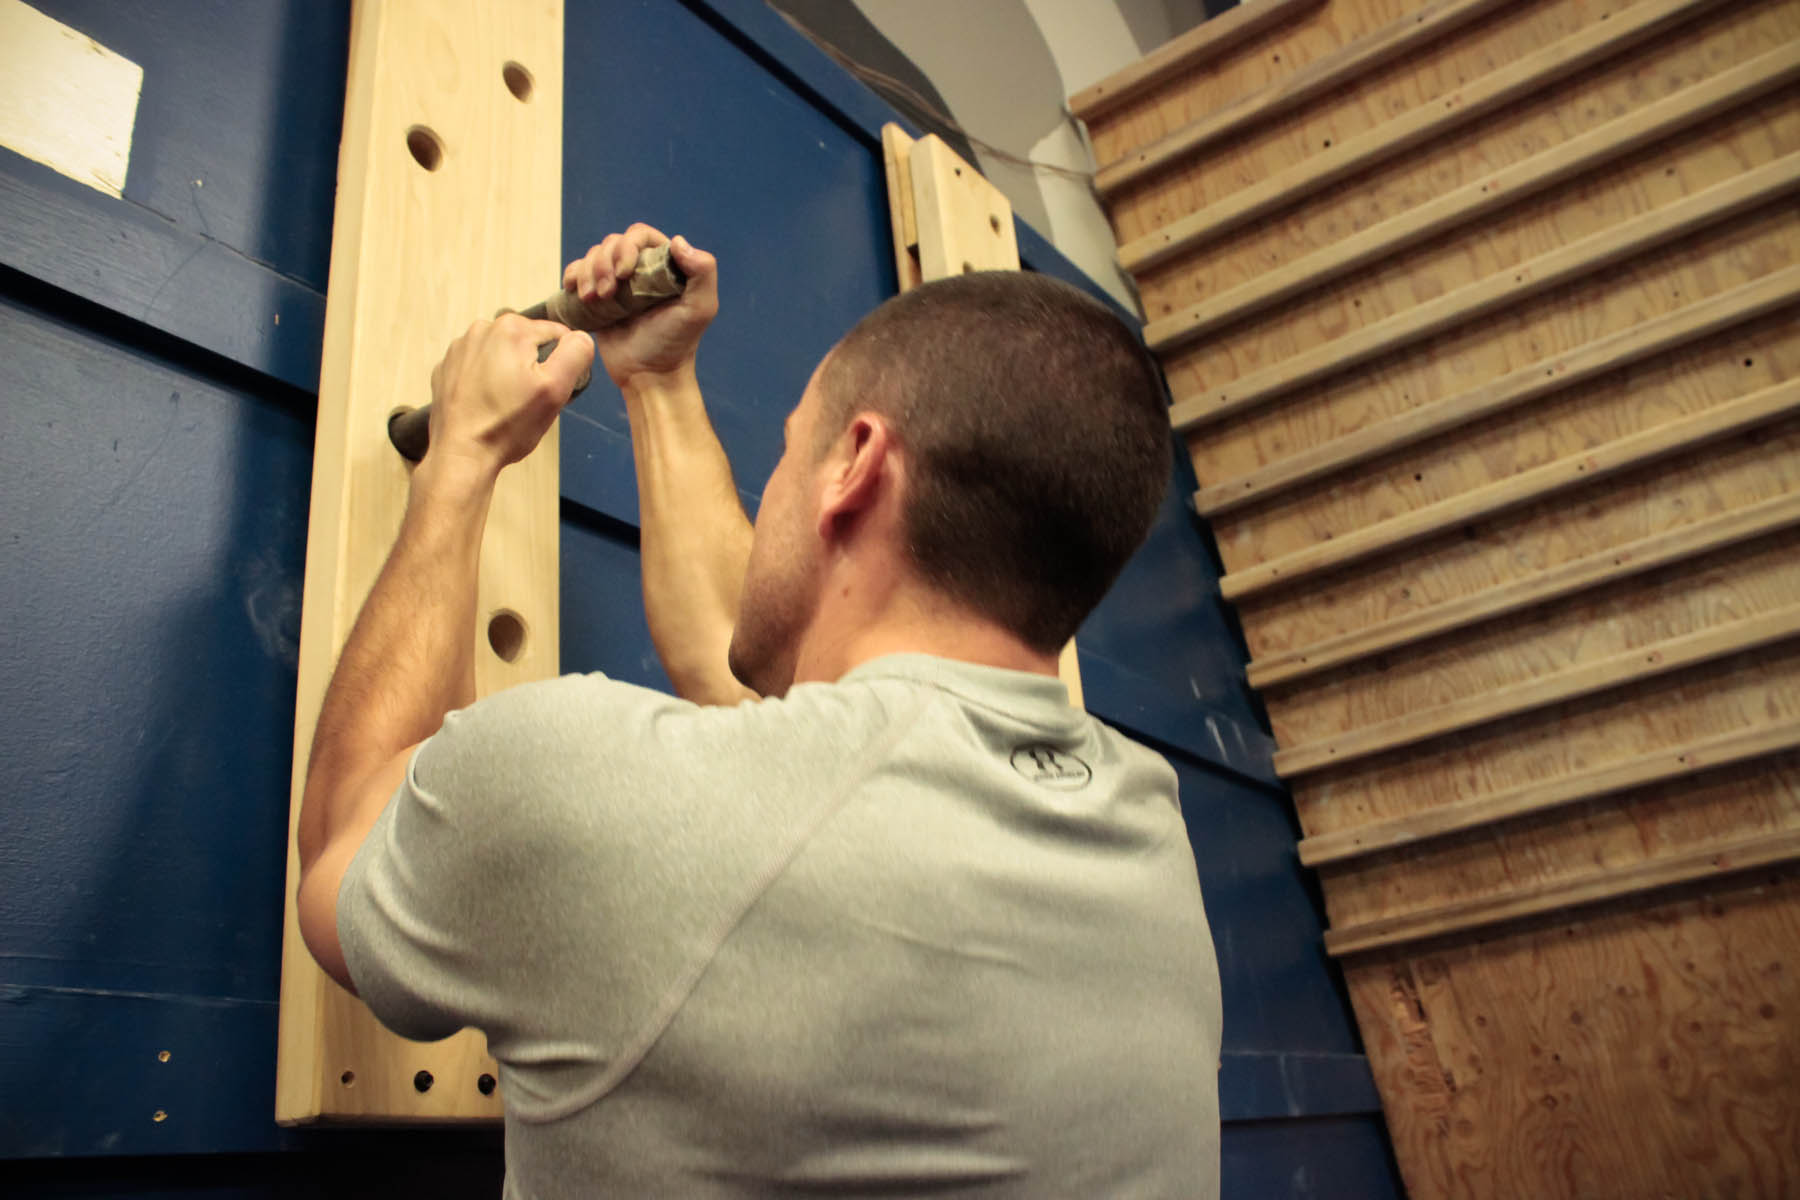 Mini-Study: Muscle-Ups, Rope Climbs, Peg Boards…Which is Harder?